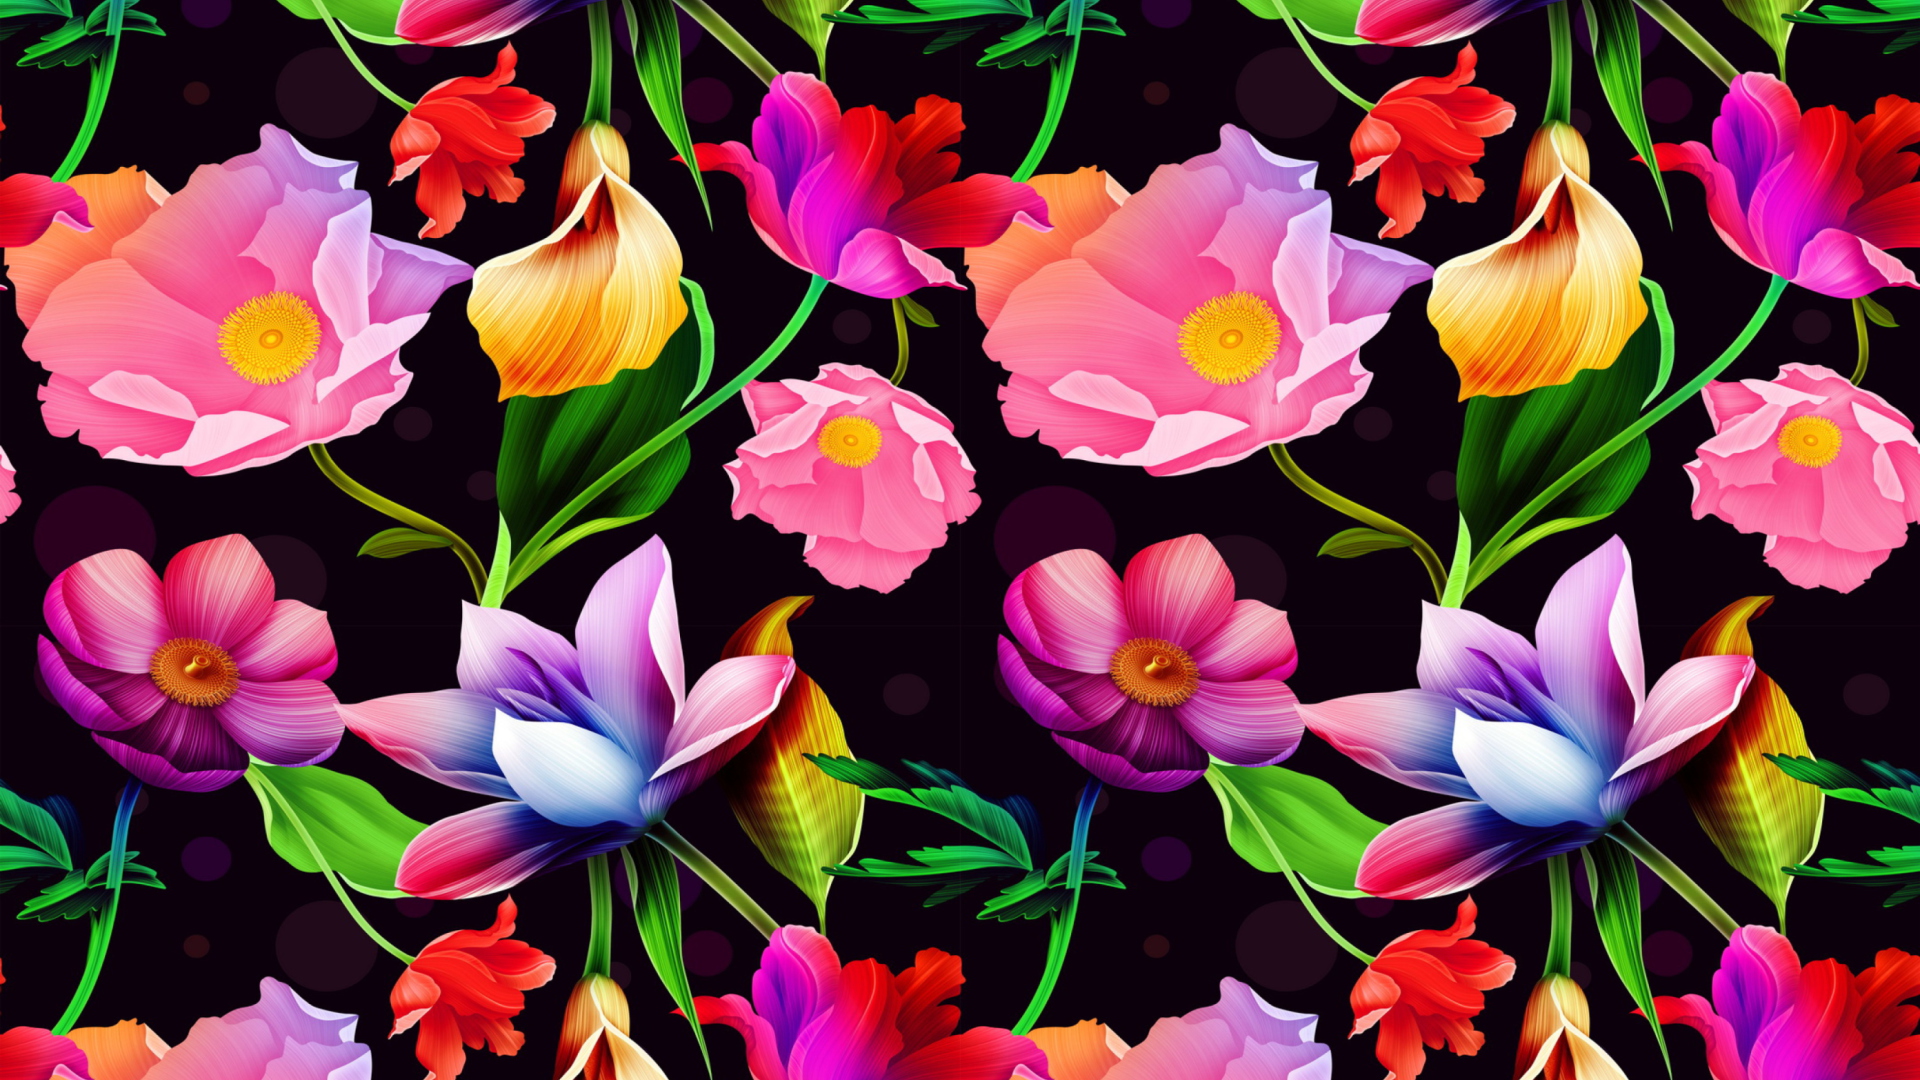 Colorful Flowers wallpaper 1920x1080